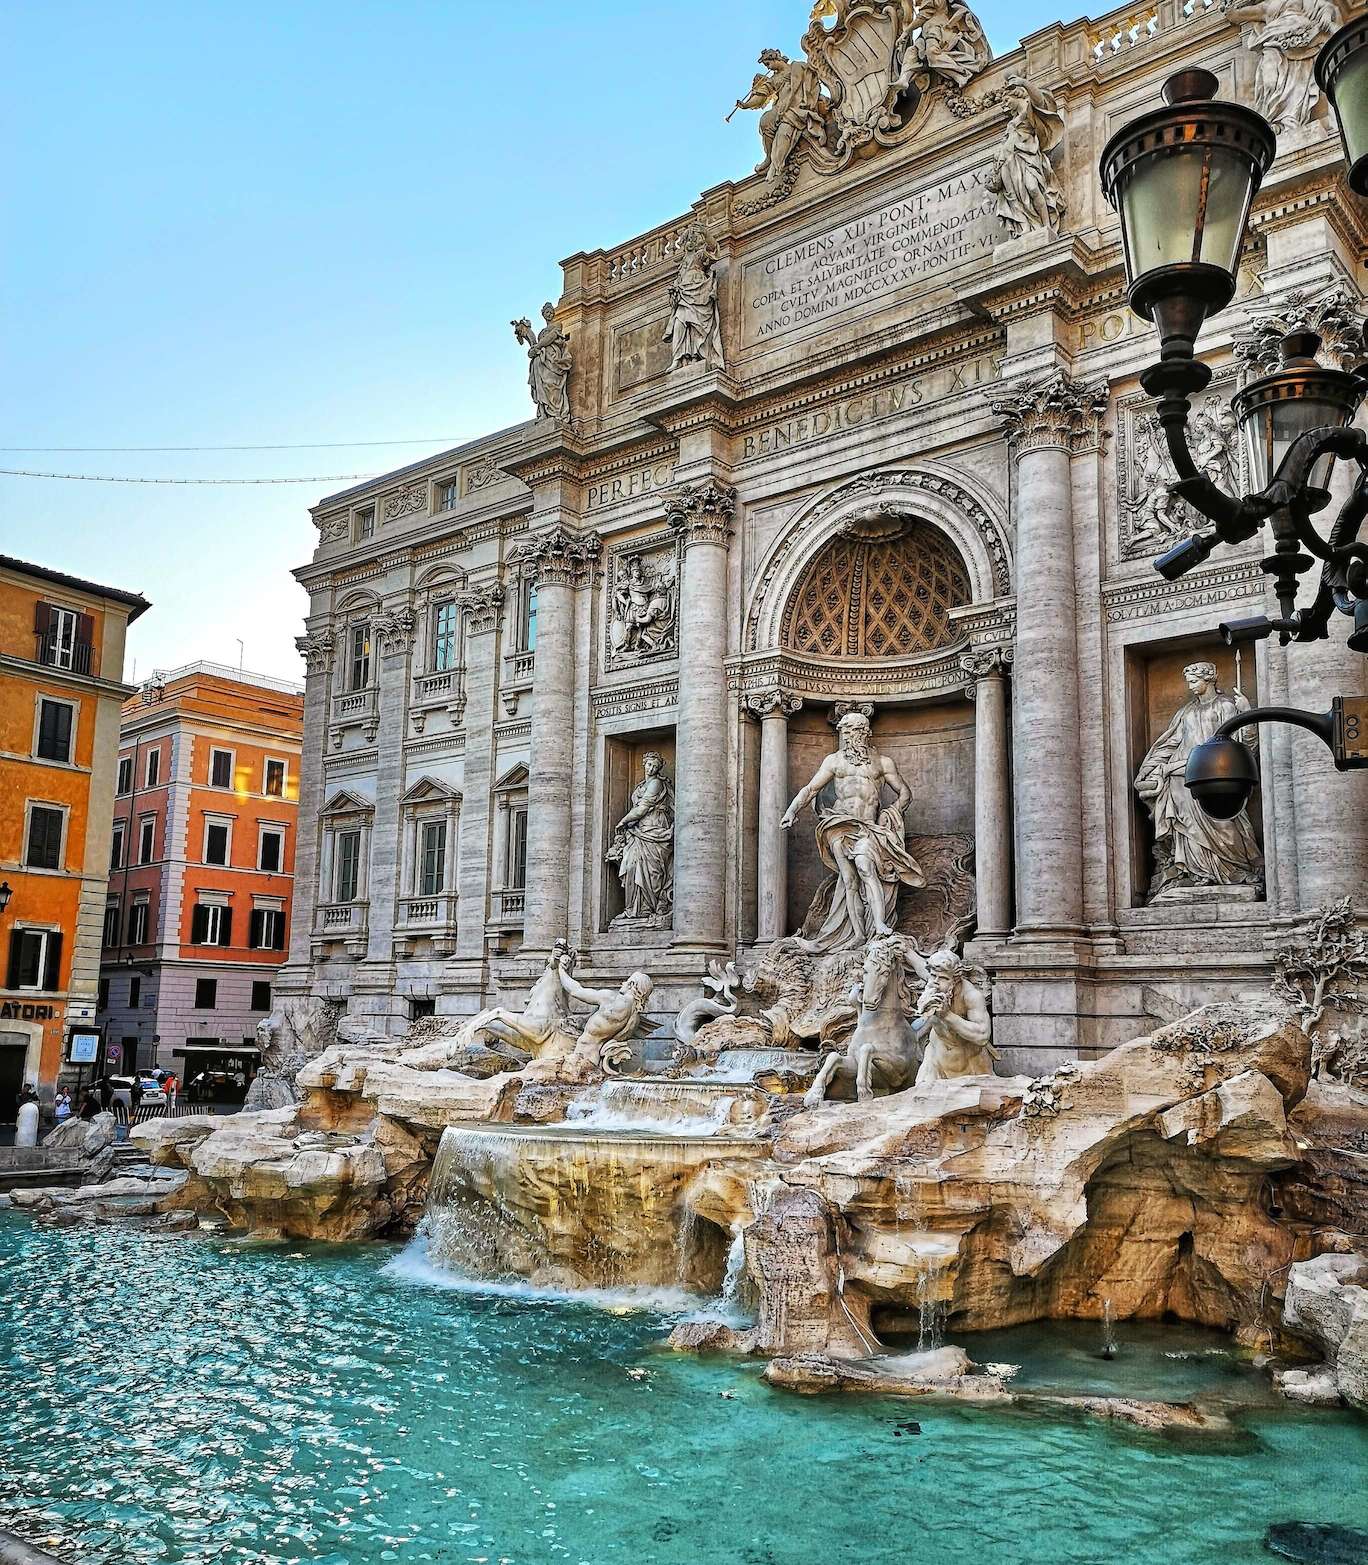 The Most Beautiful Fountains in Rome 16 of our Favourite Fountains in